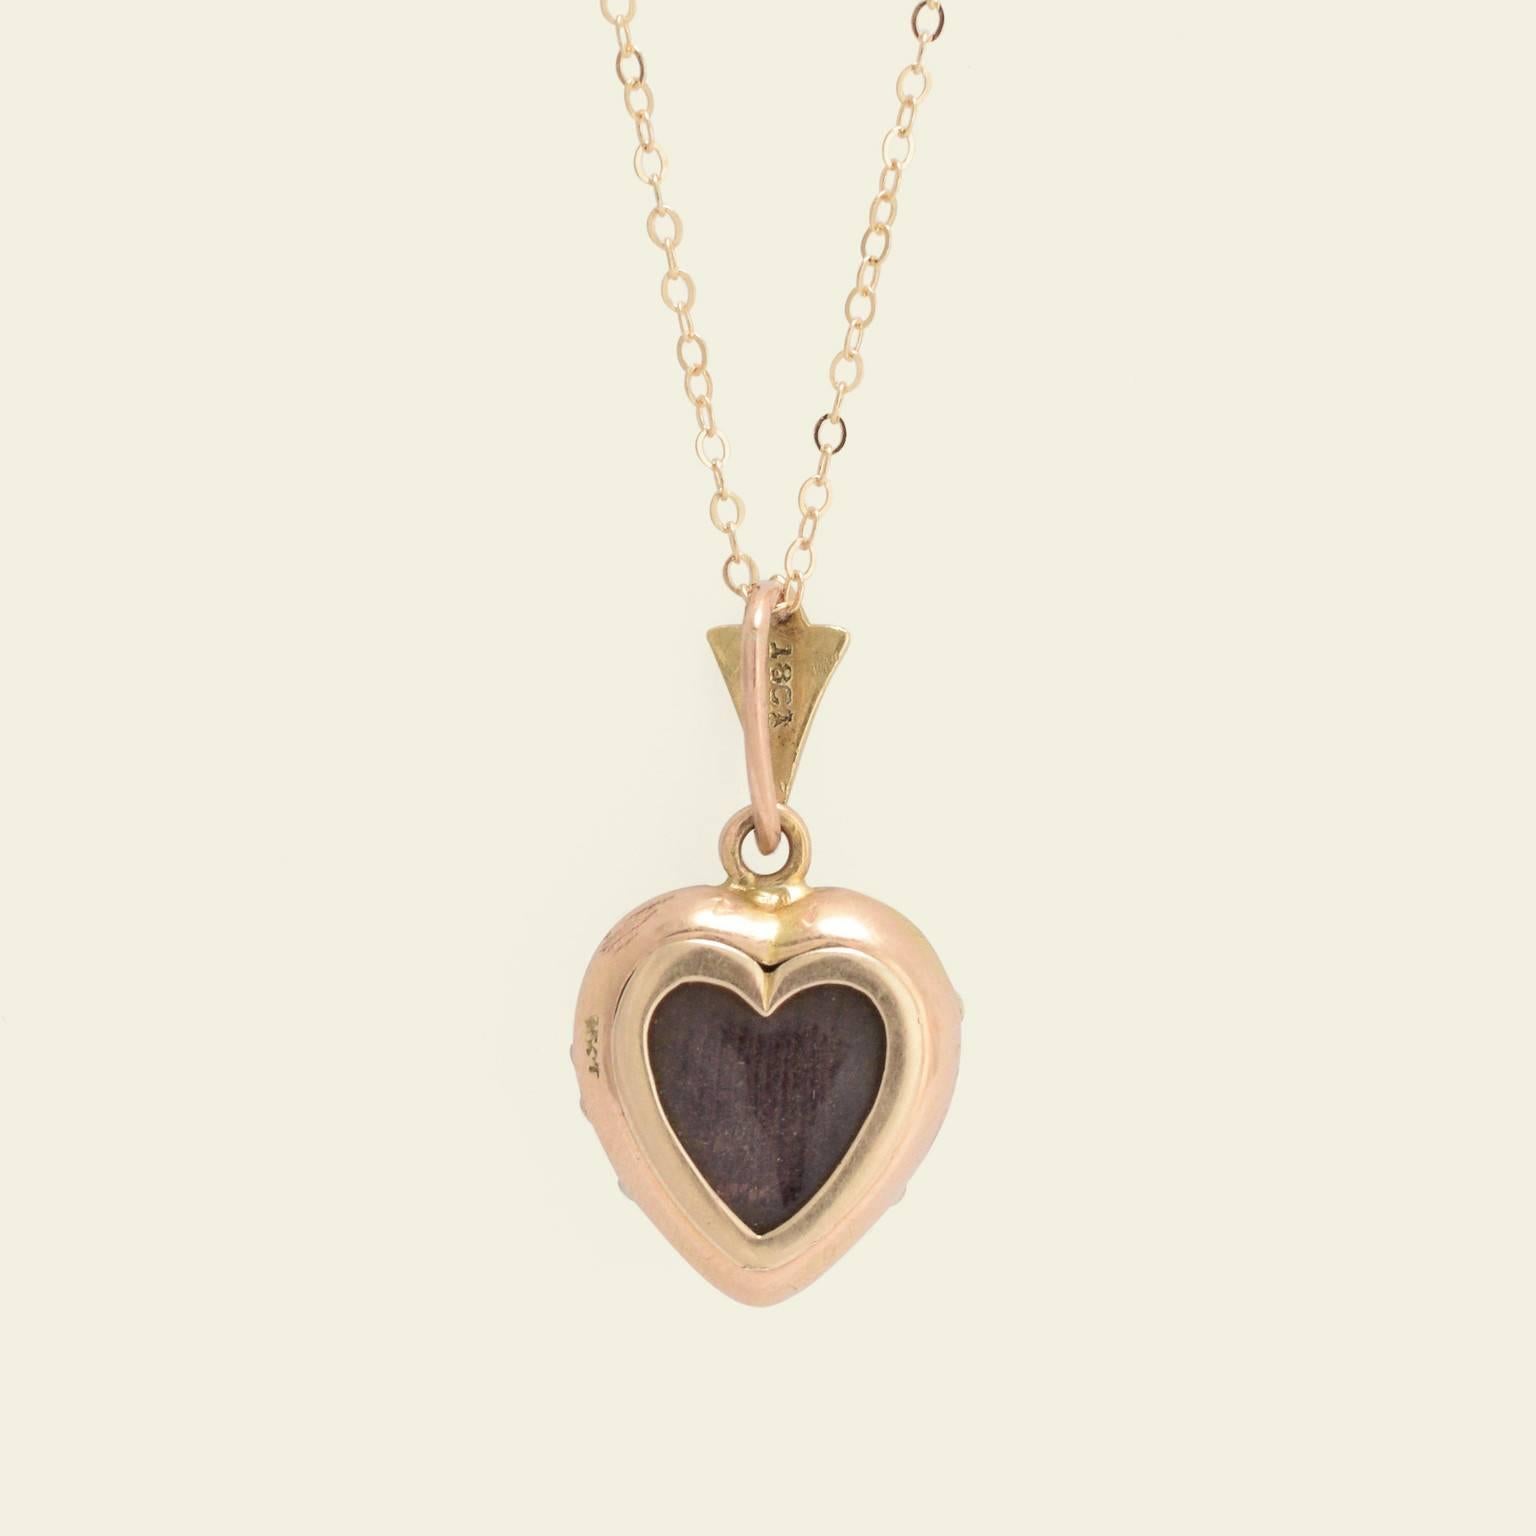 This pretty Victorian heart locket is fashioned in 18k yellow gold and dates to the 1880s. The locket and the fancy bail it hangs from are pavé set with lustrous white seed pearls. The reverse side features a glass-fronted locket which can easily be